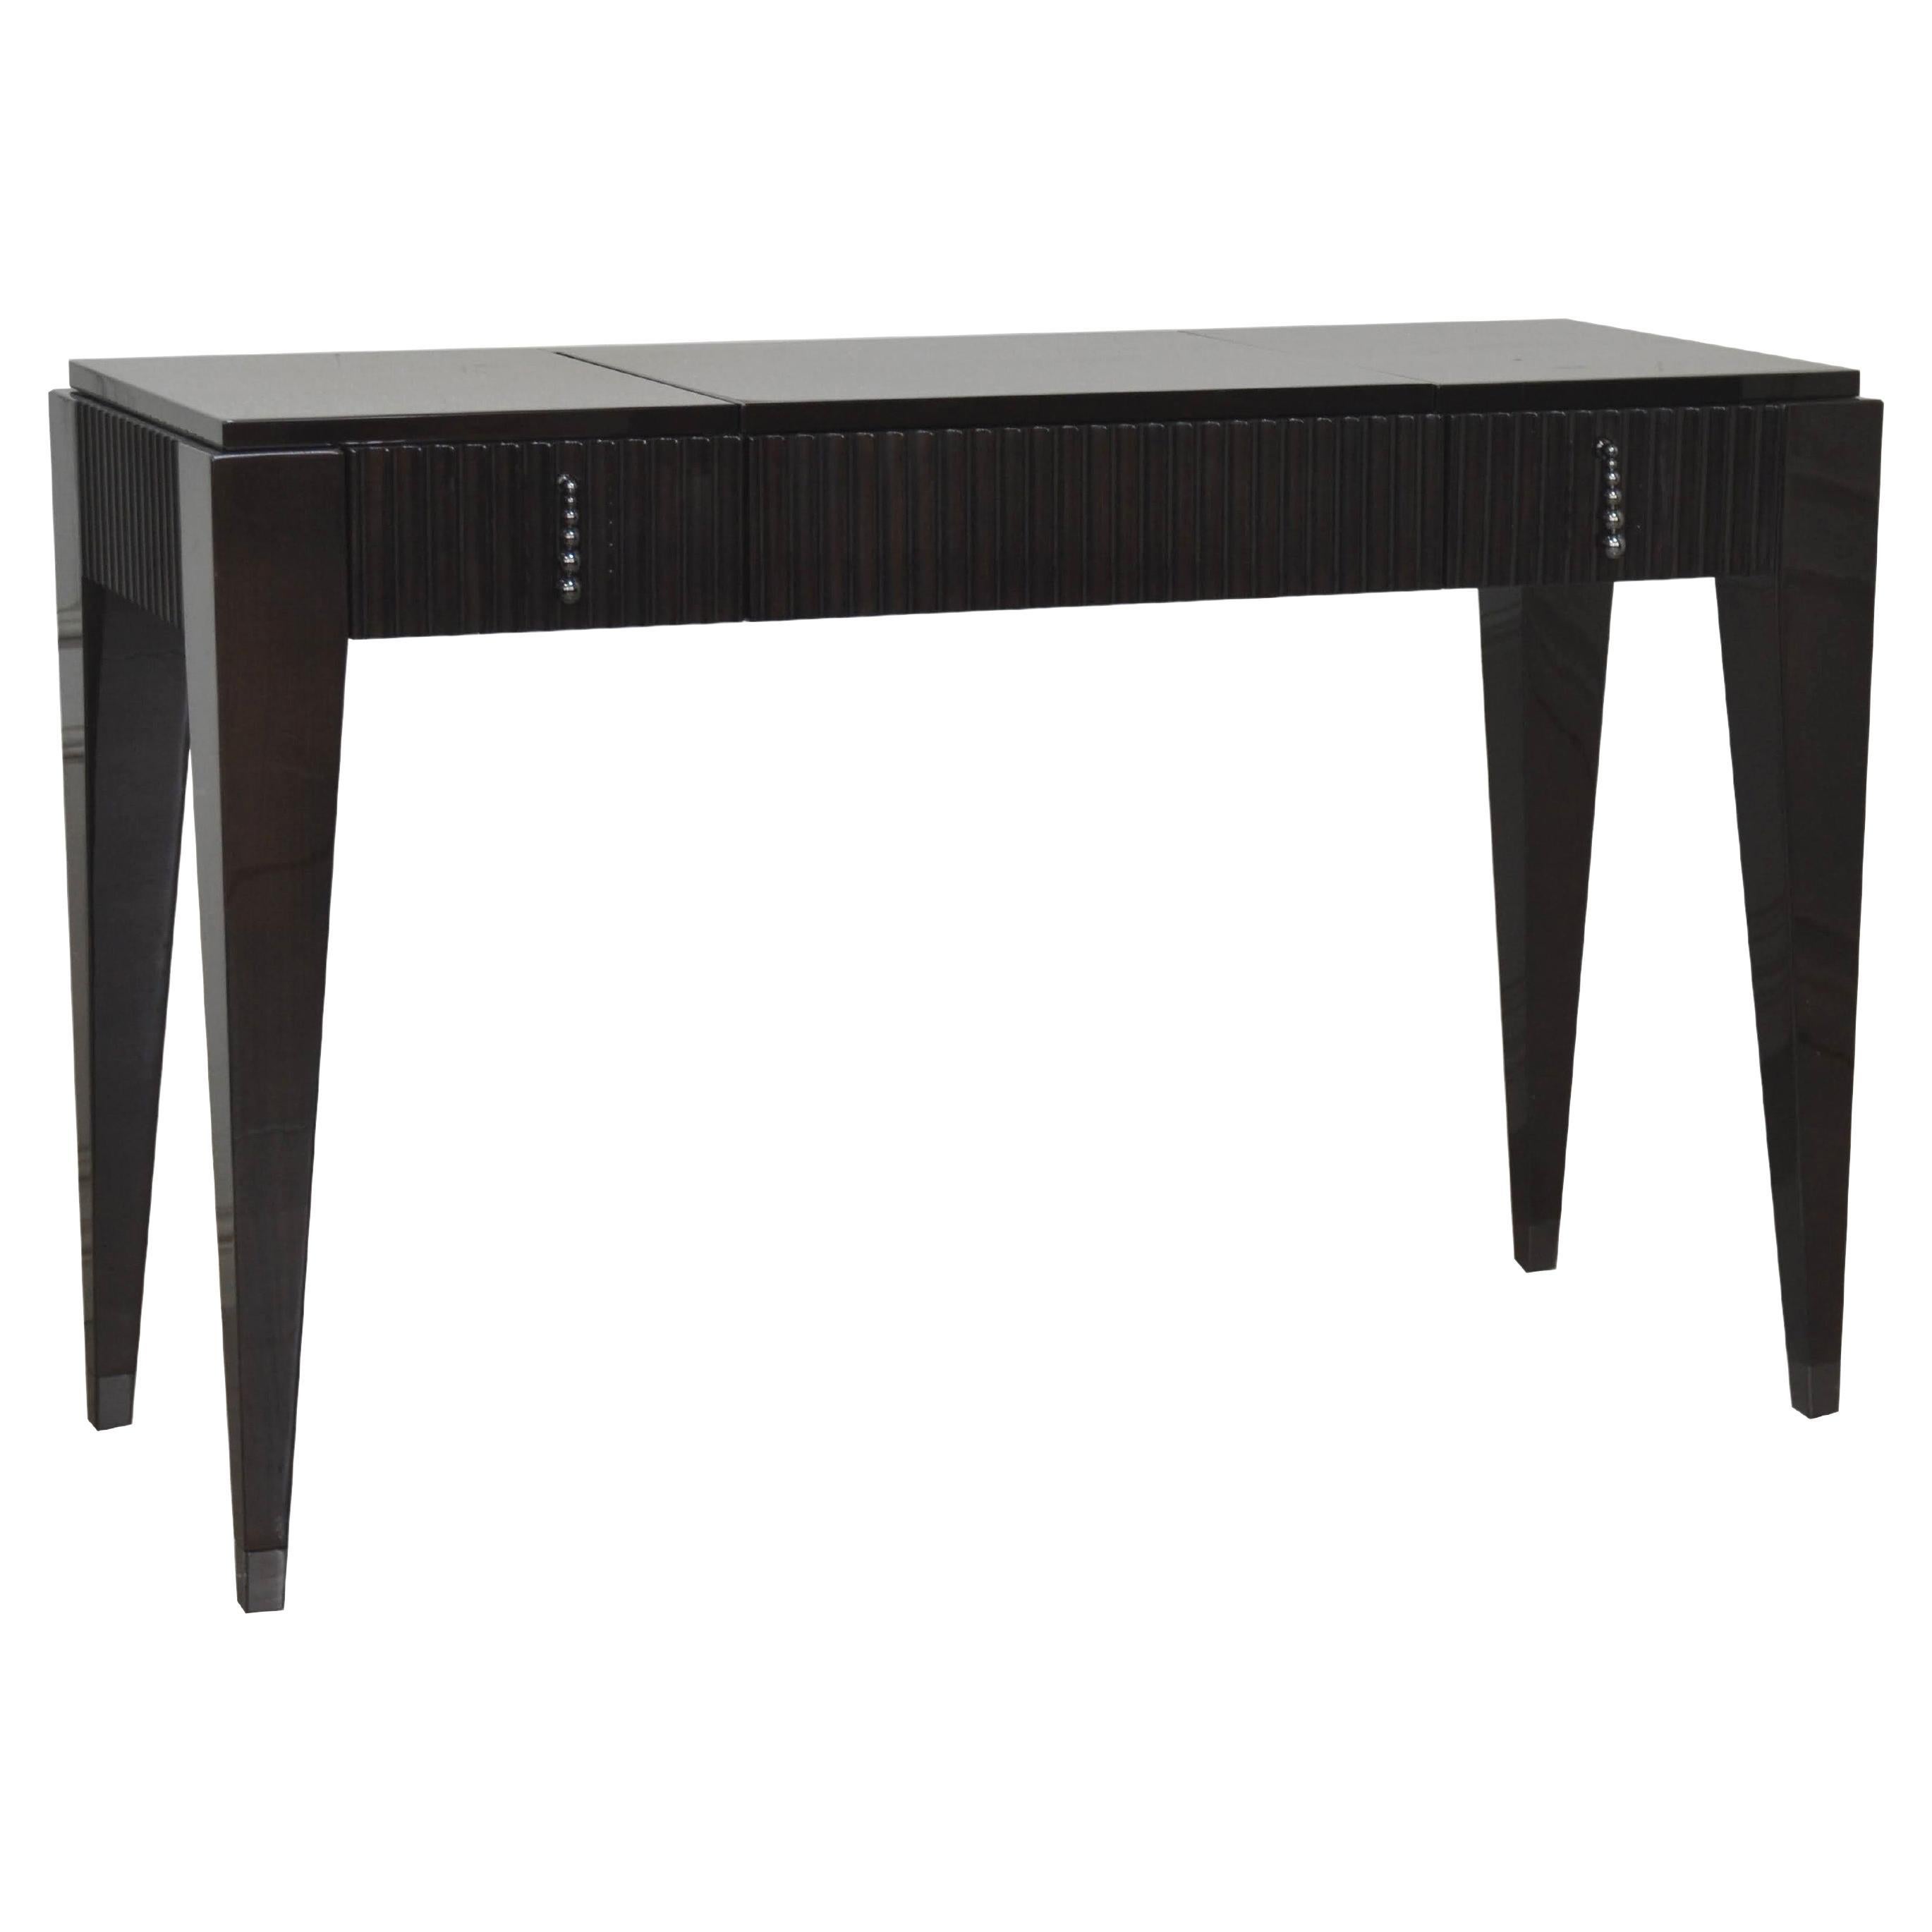 Art Deco Italian Modern Vanity Table in Dark High-Gloss Ebony Finishing with Two Drawers For Sale